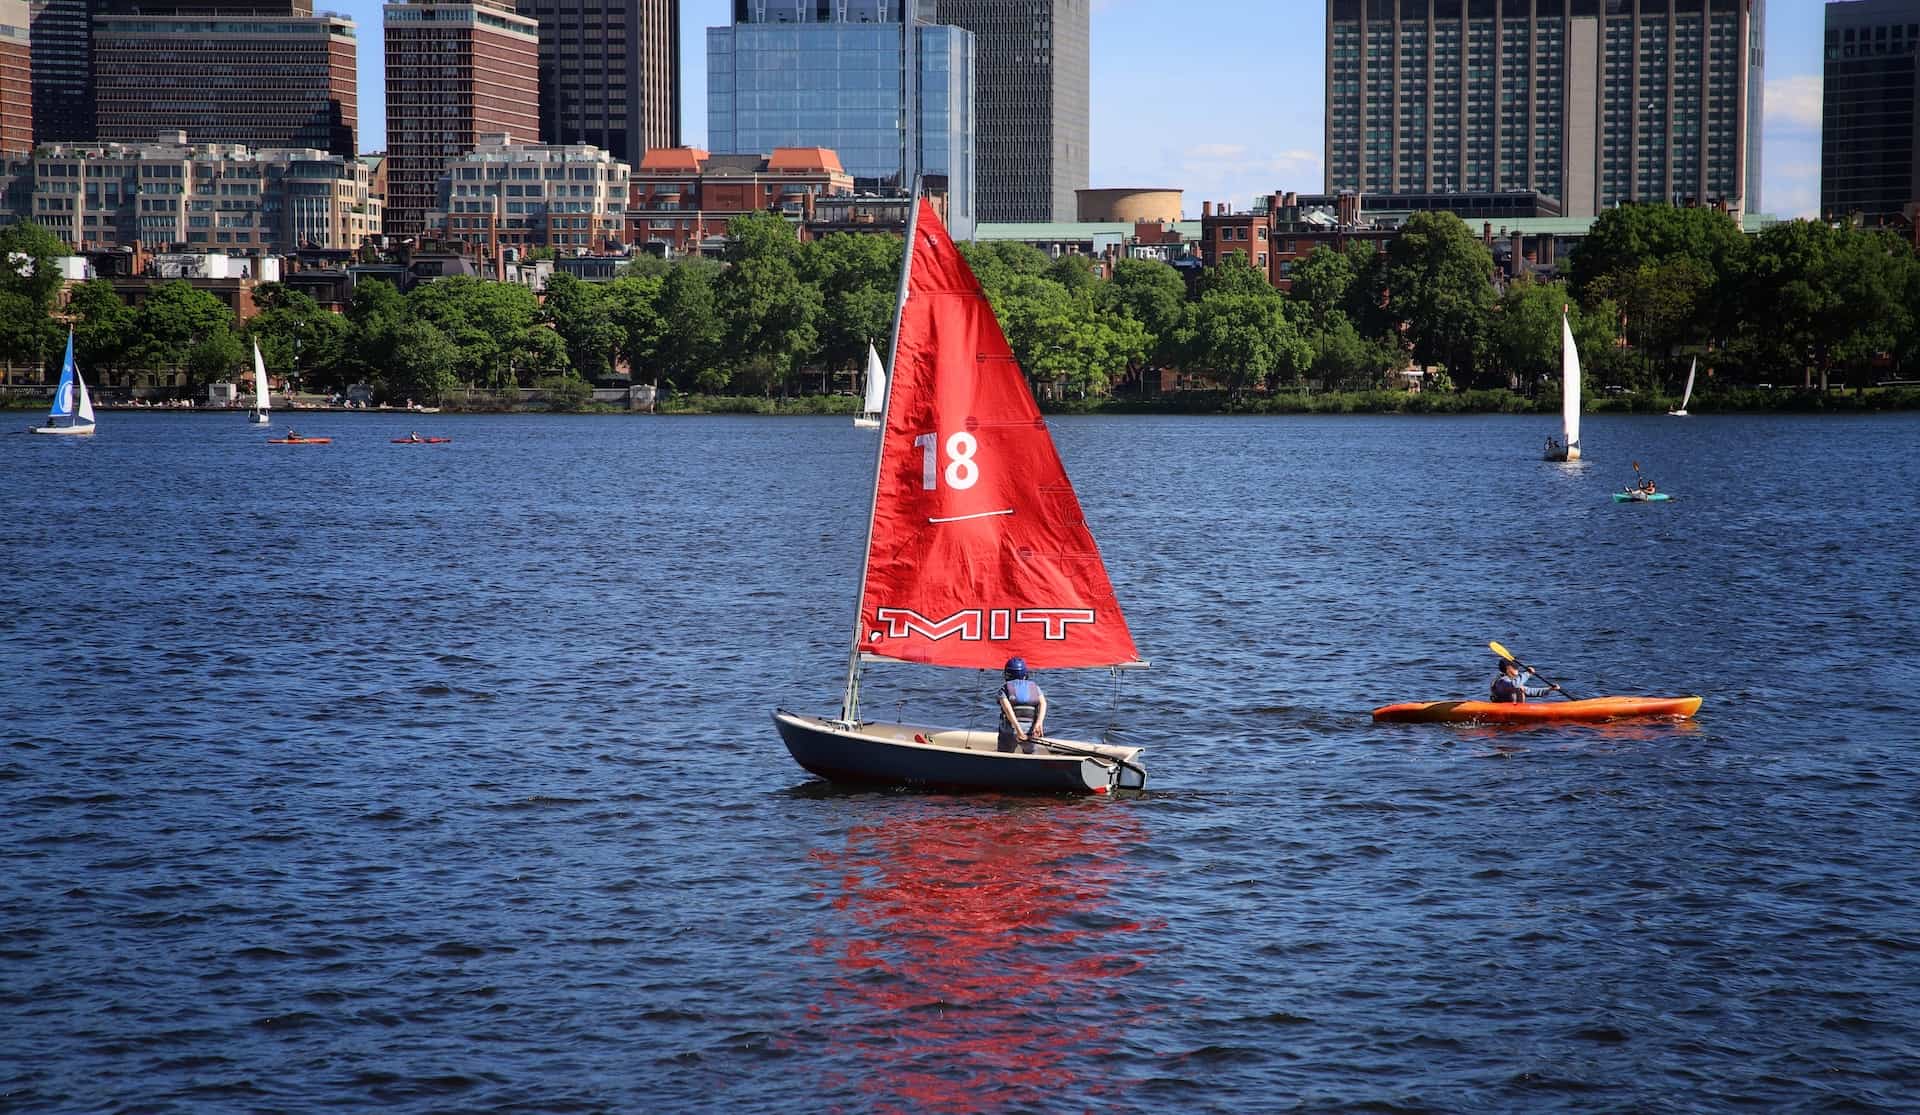 Image of a Sailing Dinghy on a still river with a red sail and a Kayak going past it